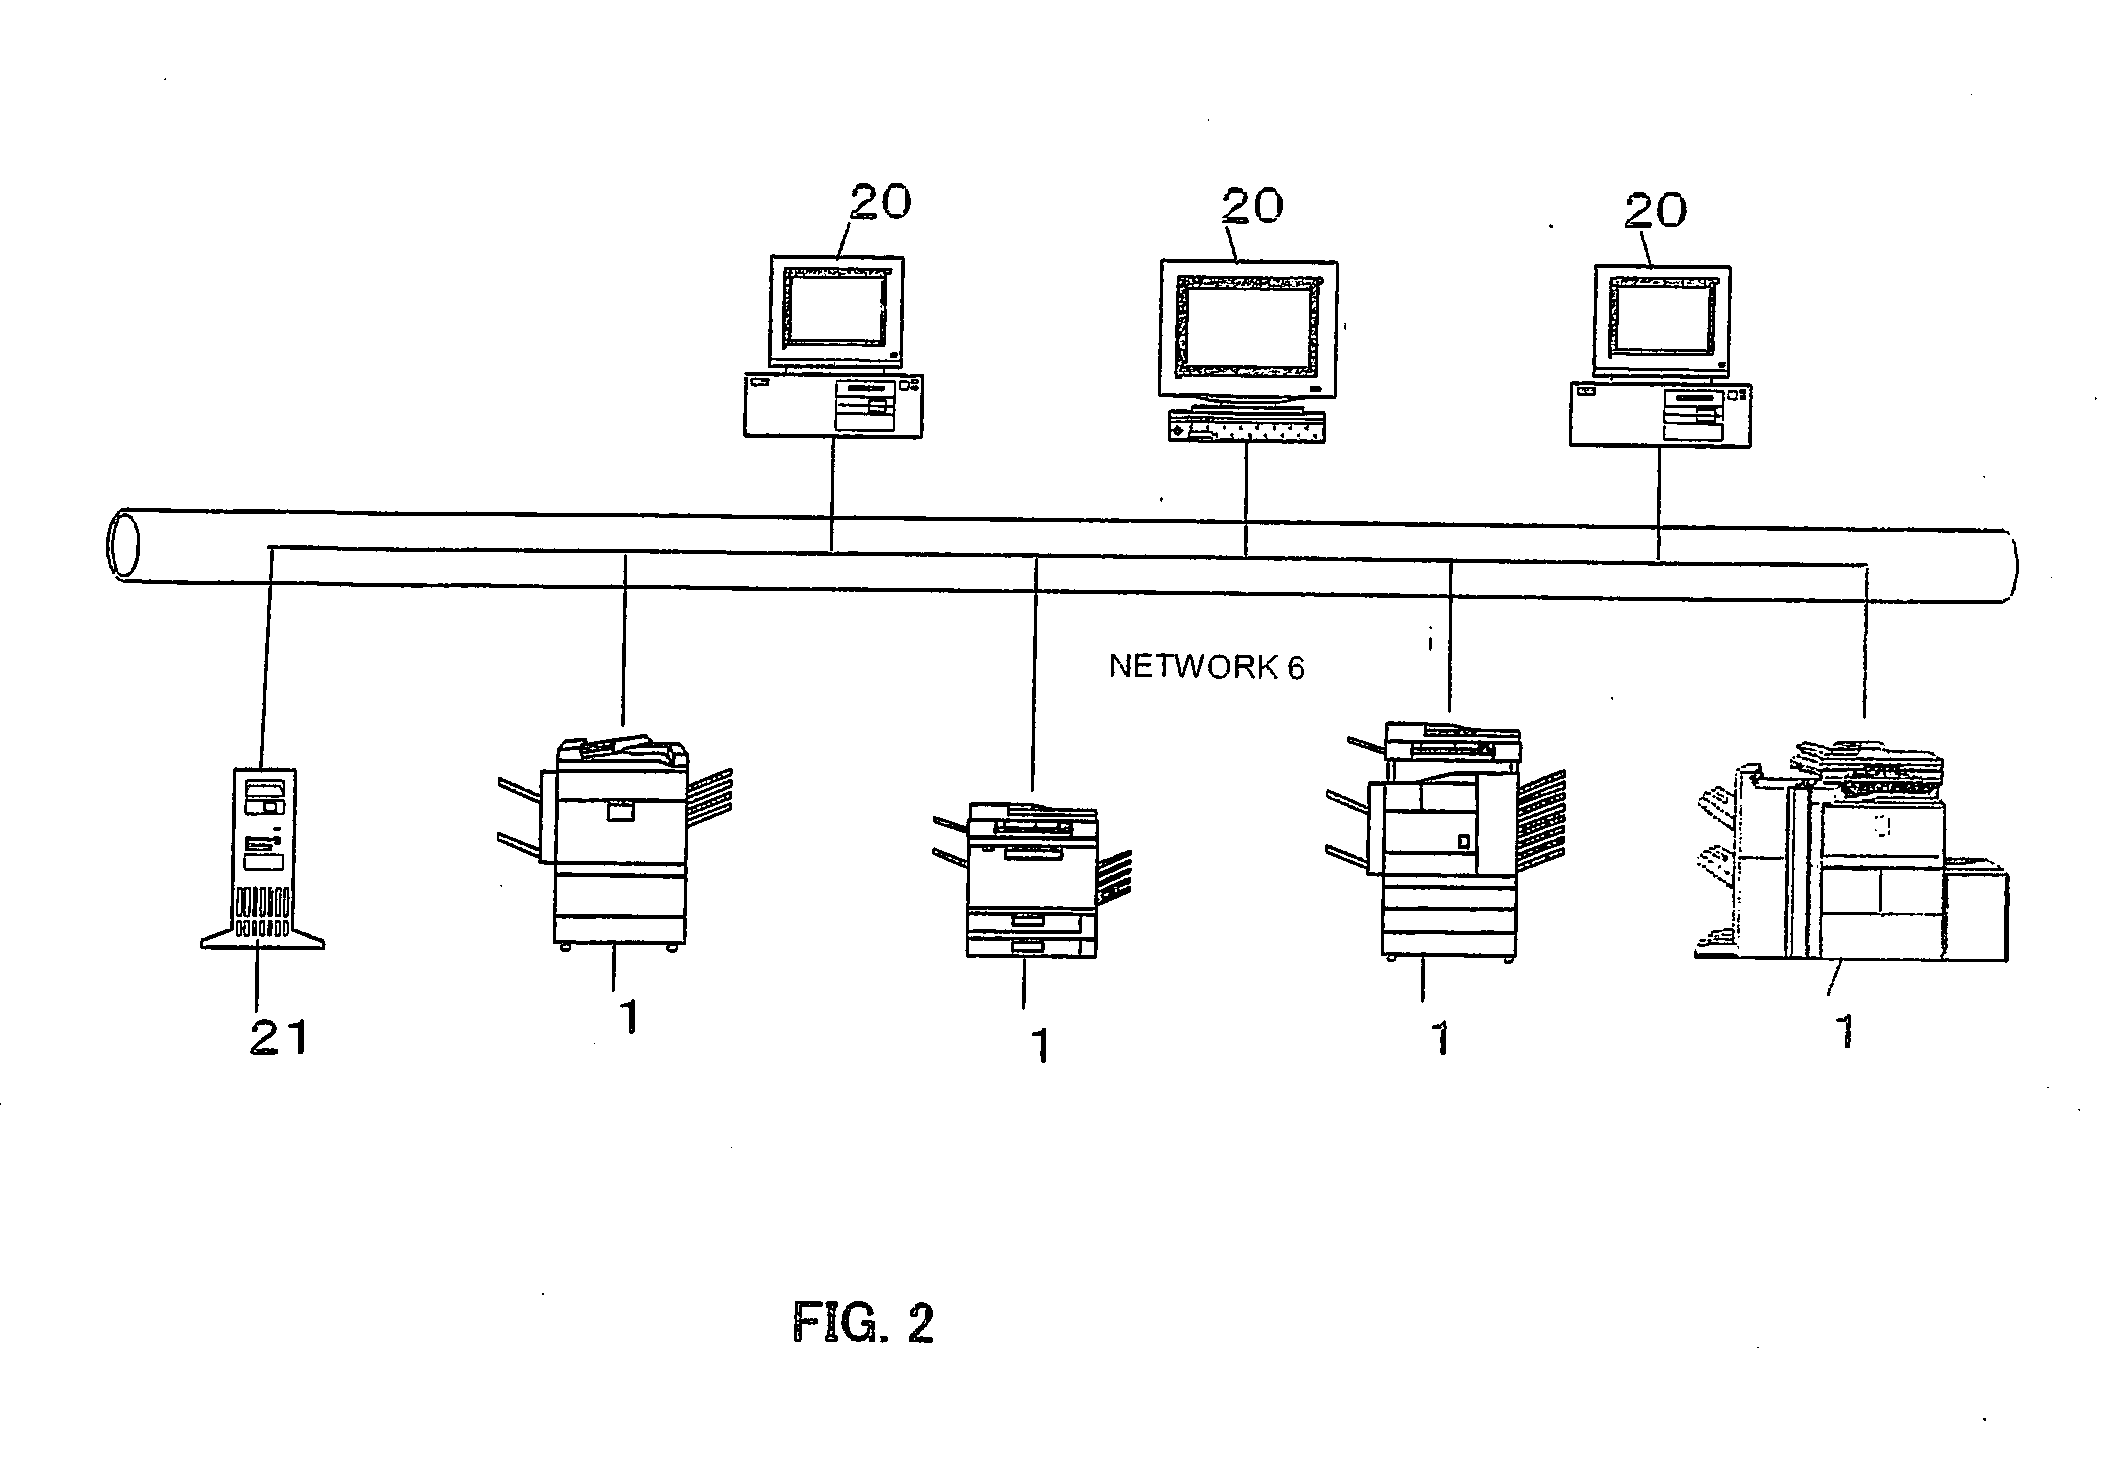 Facsimile communication system and image processing apparatus